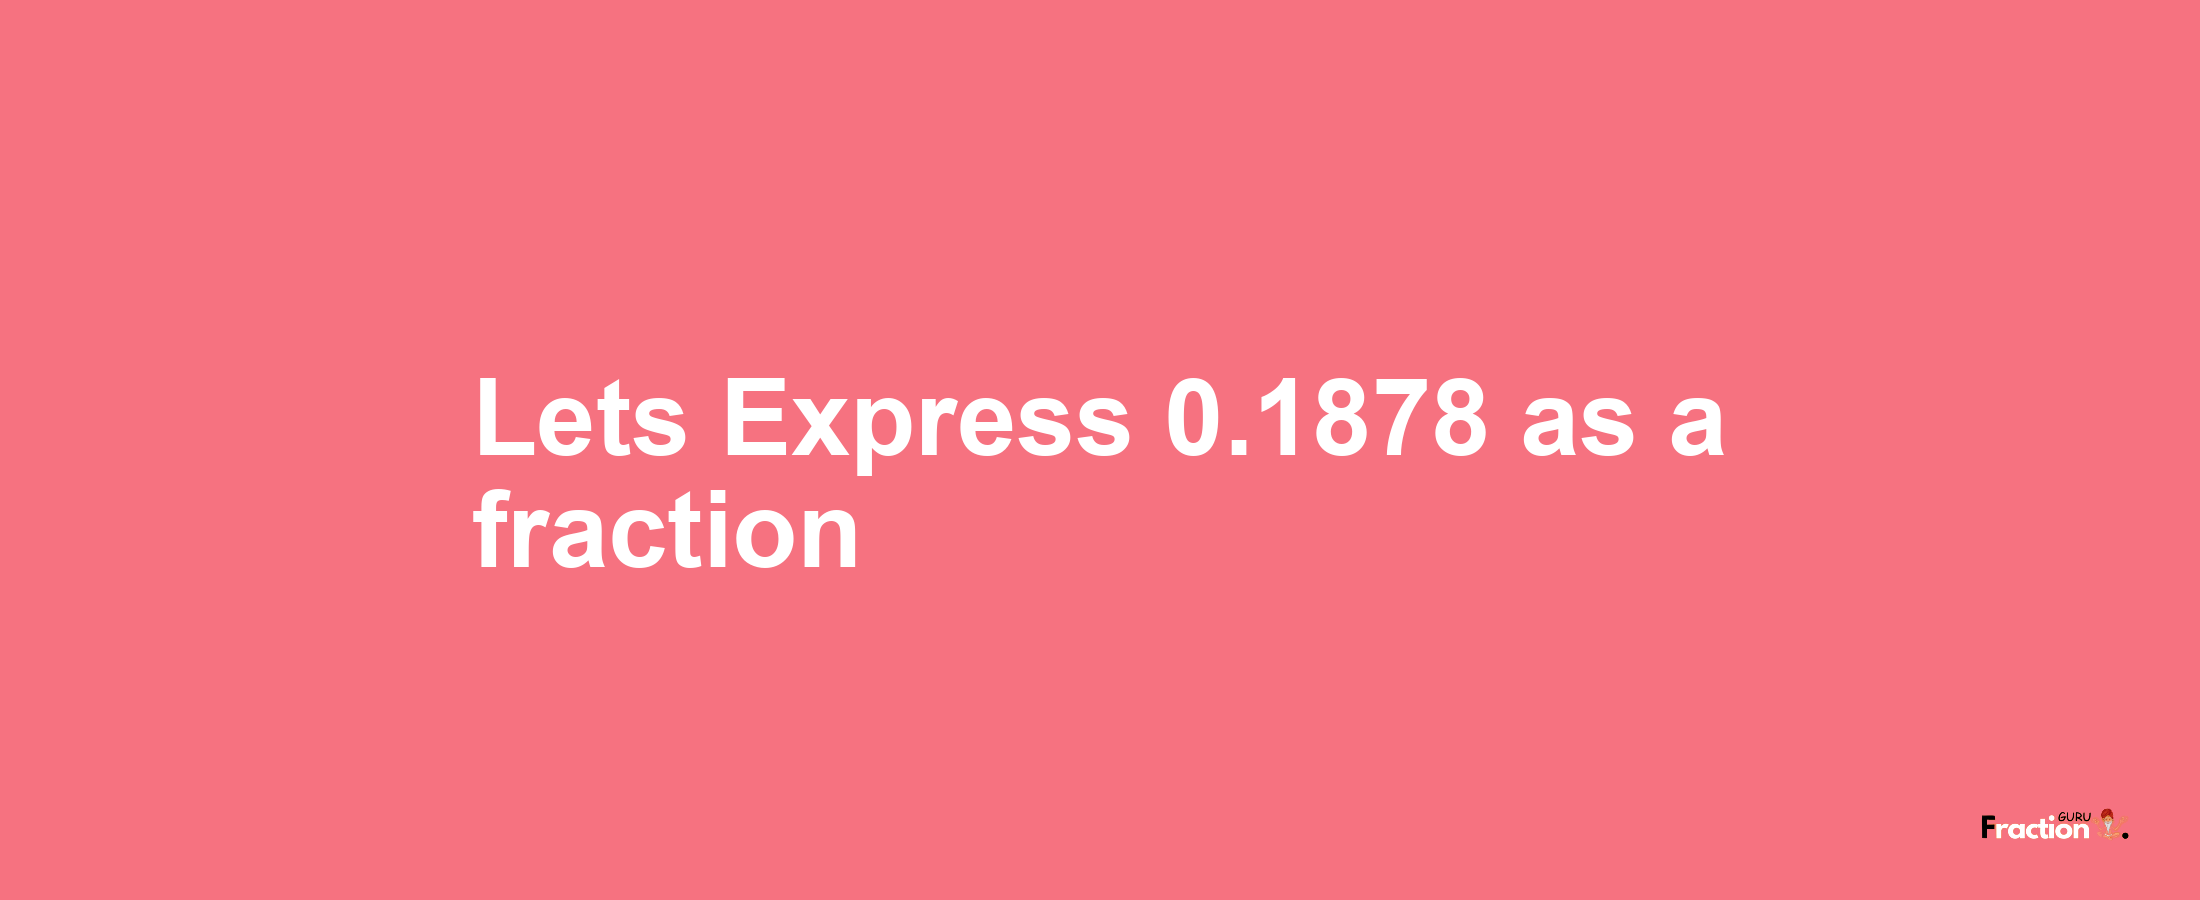 Lets Express 0.1878 as afraction